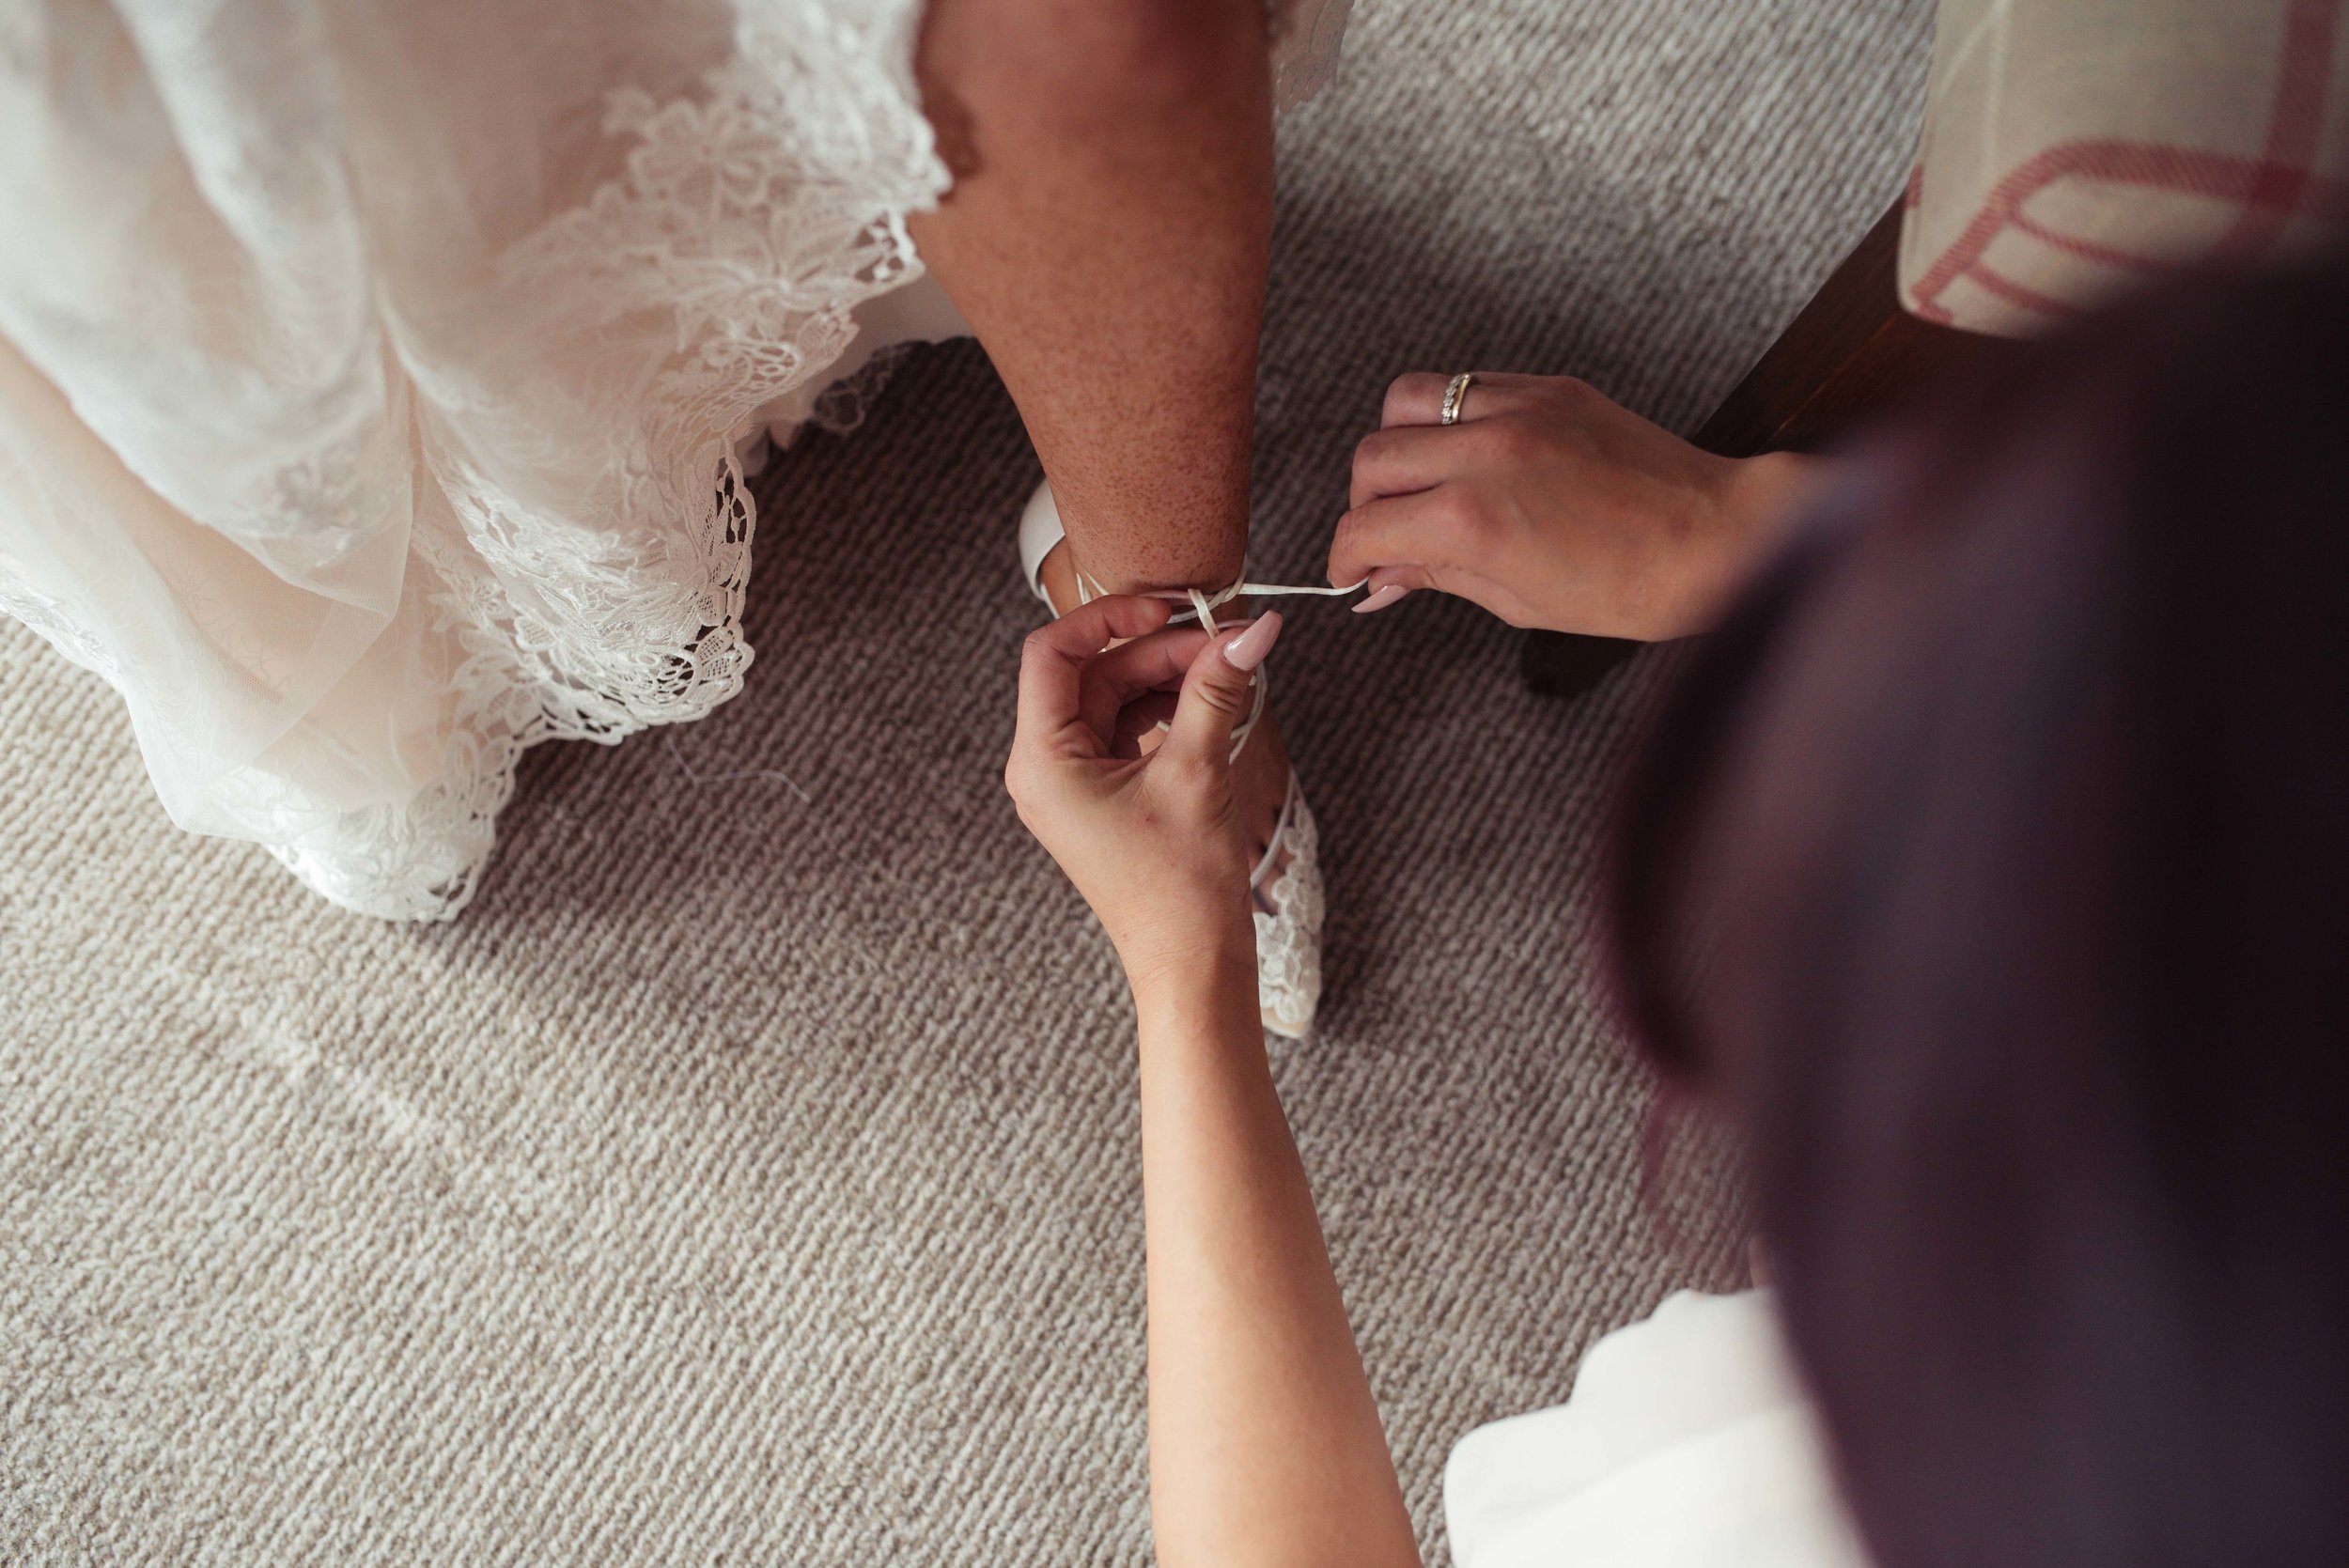 The brides sister helps her put on her lace wedding shoes